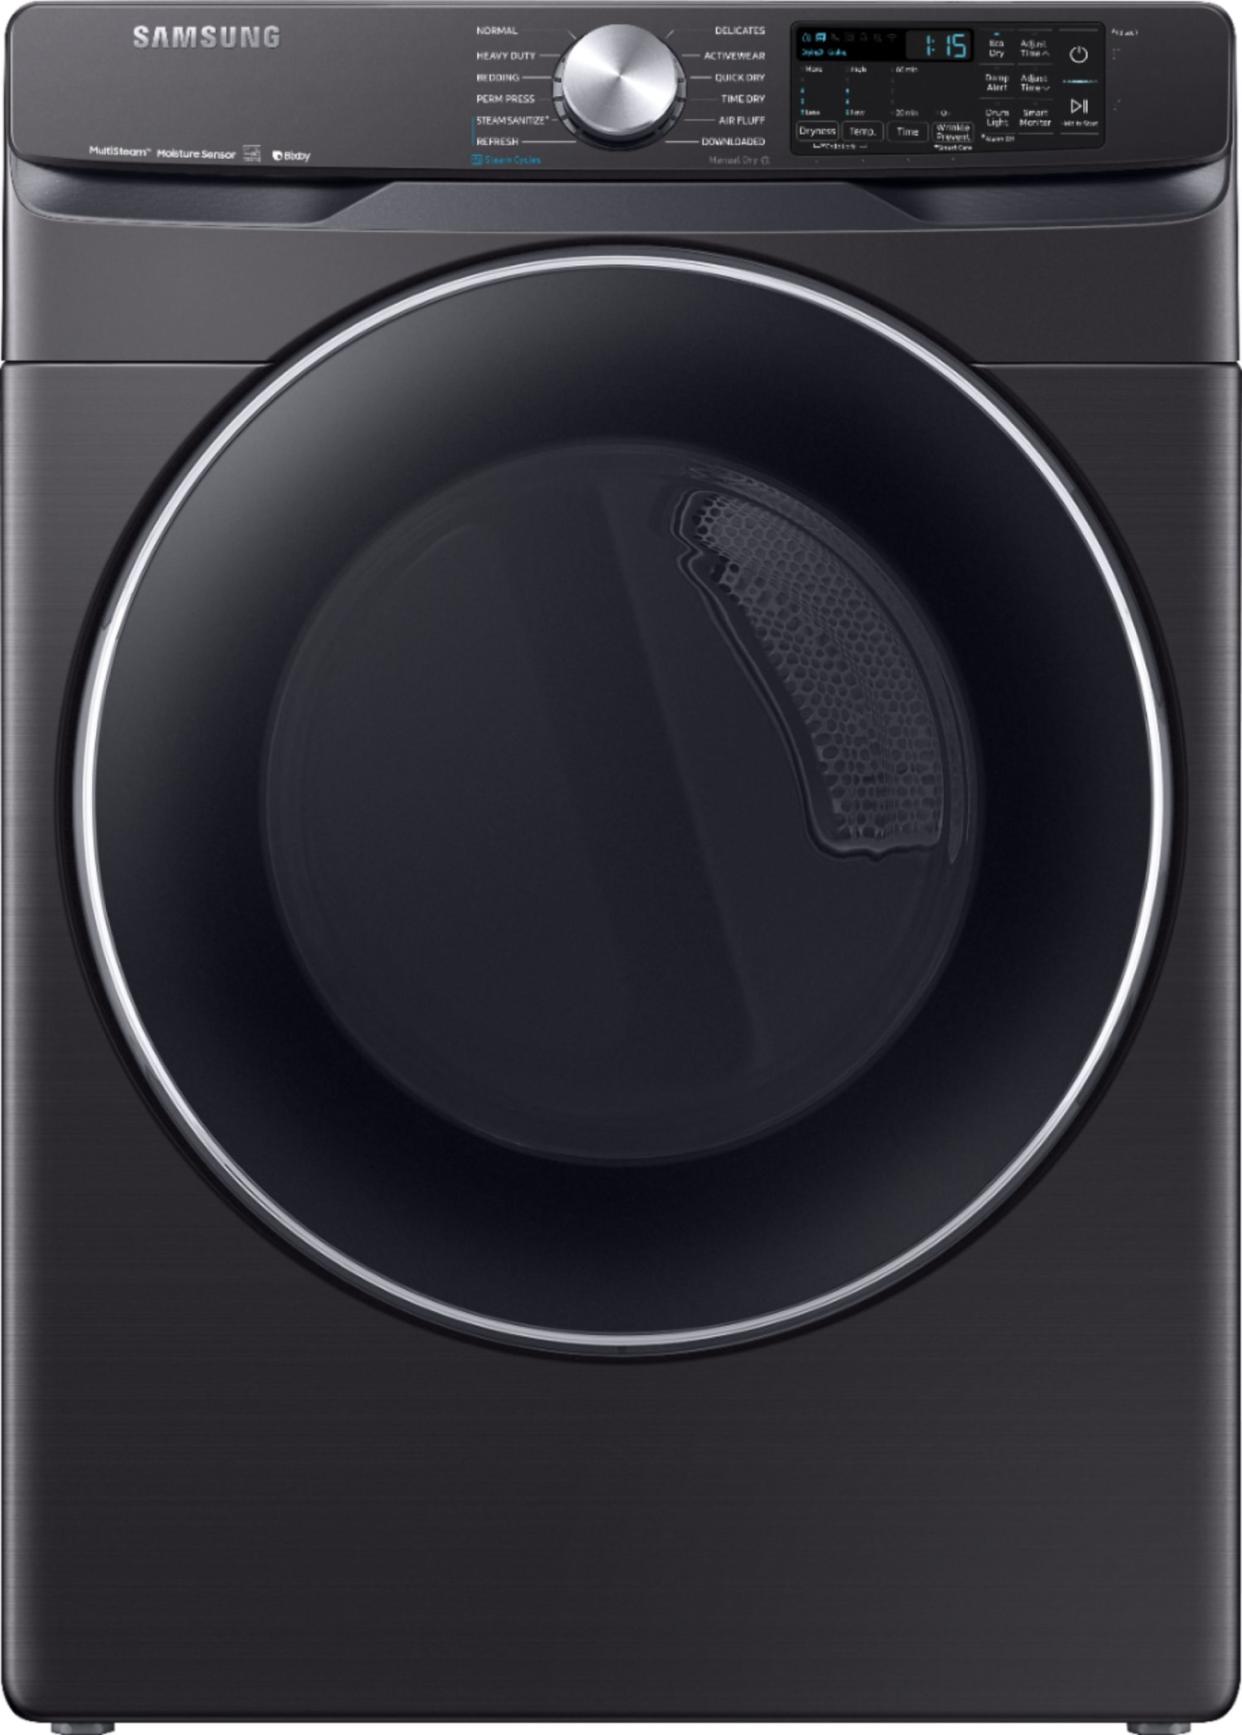 Samsung 7.5 cu. ft. Fingerprint Resistant Black Stainless Electric Dryer with Steam Sanitize+, ENERGY STAR ('Multiple' Murder Victims Found in Calif. Home / 'Multiple' Murder Victims Found in Calif. Home)